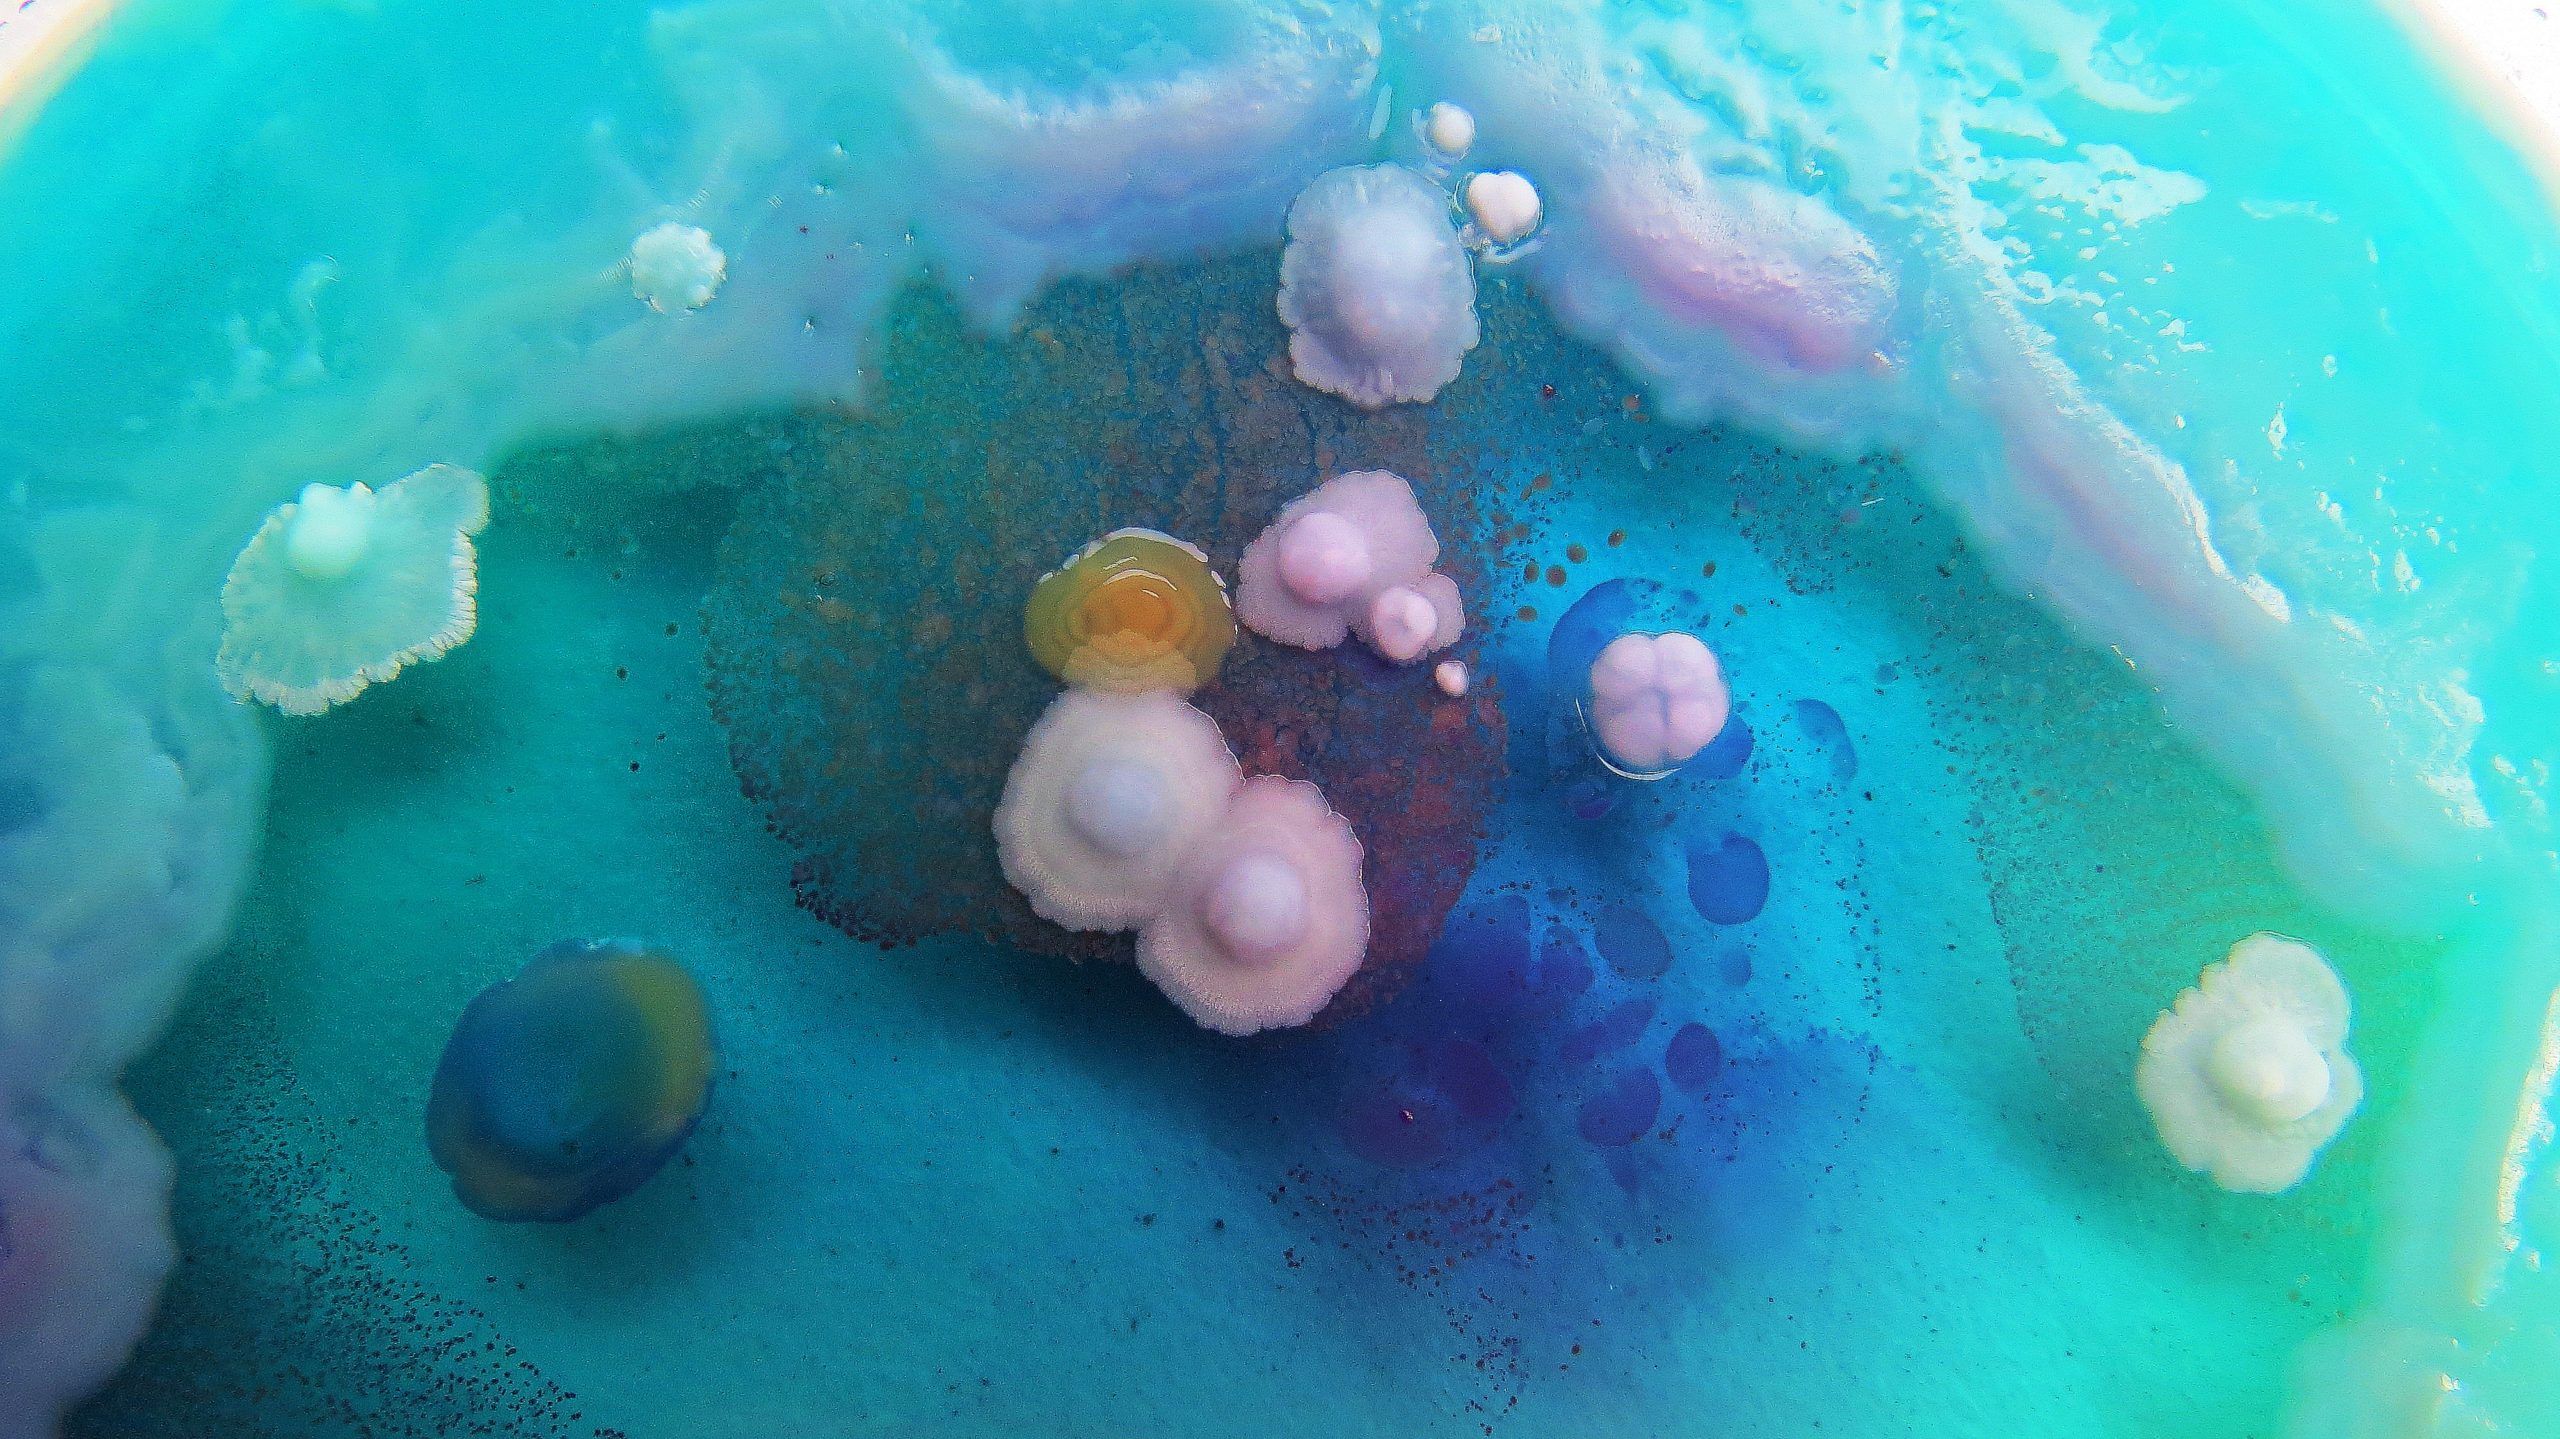 Bright blue mold-covered liquid fills the entire composition. There are smaller pink and yellow spores at the centre of the larger blue field of liquid.